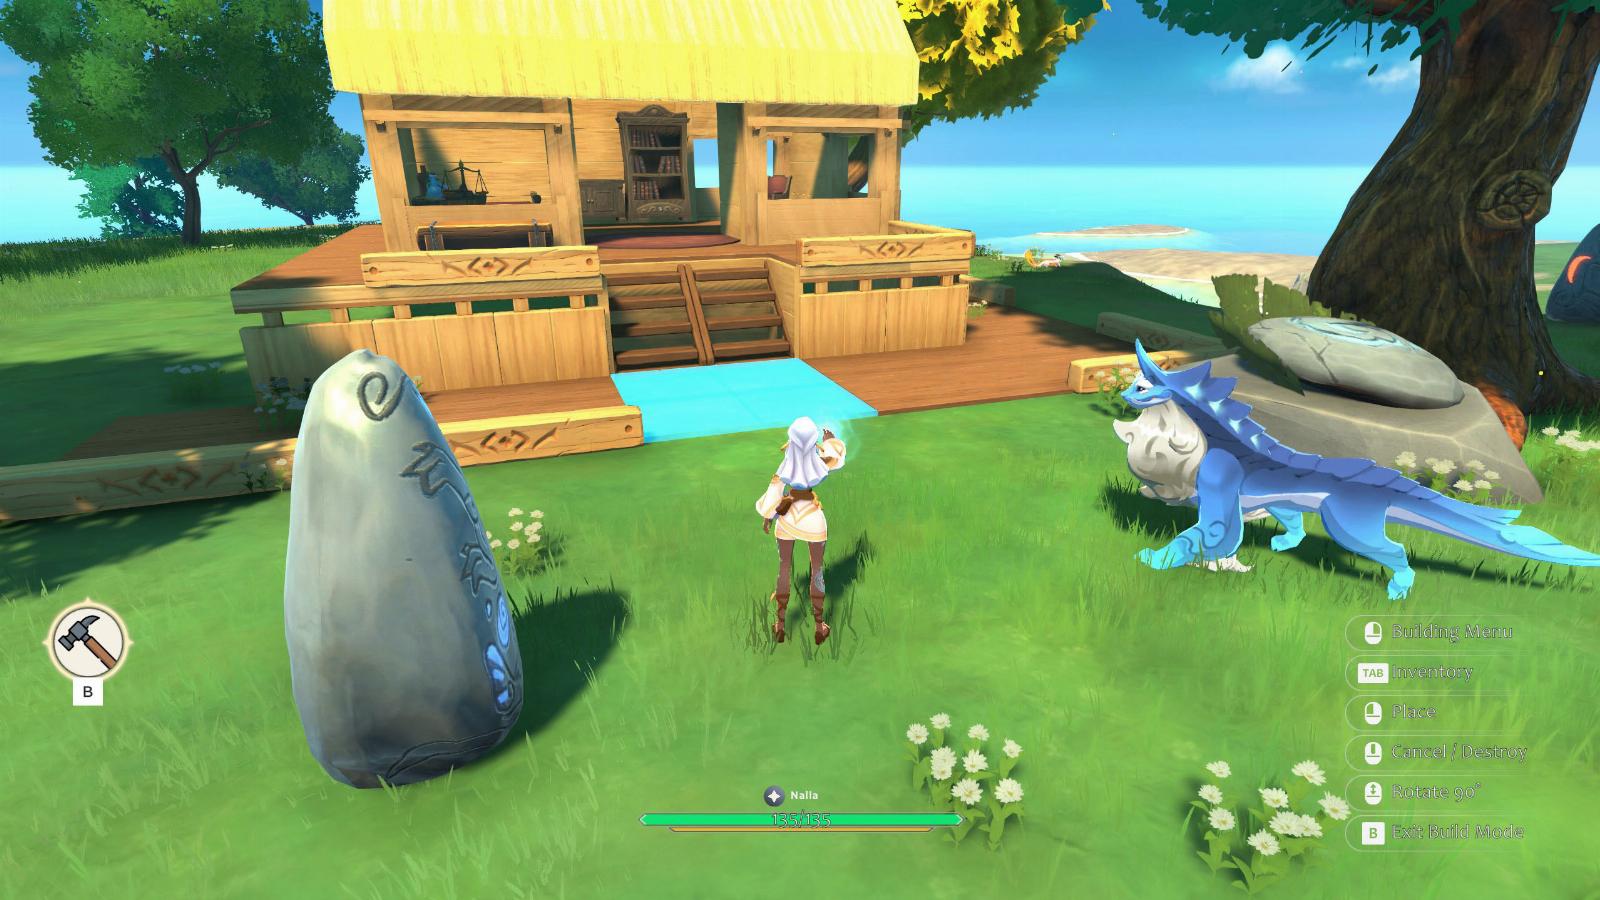 Lumari is a new social sandbox game with cute creatures, building capabilities and more